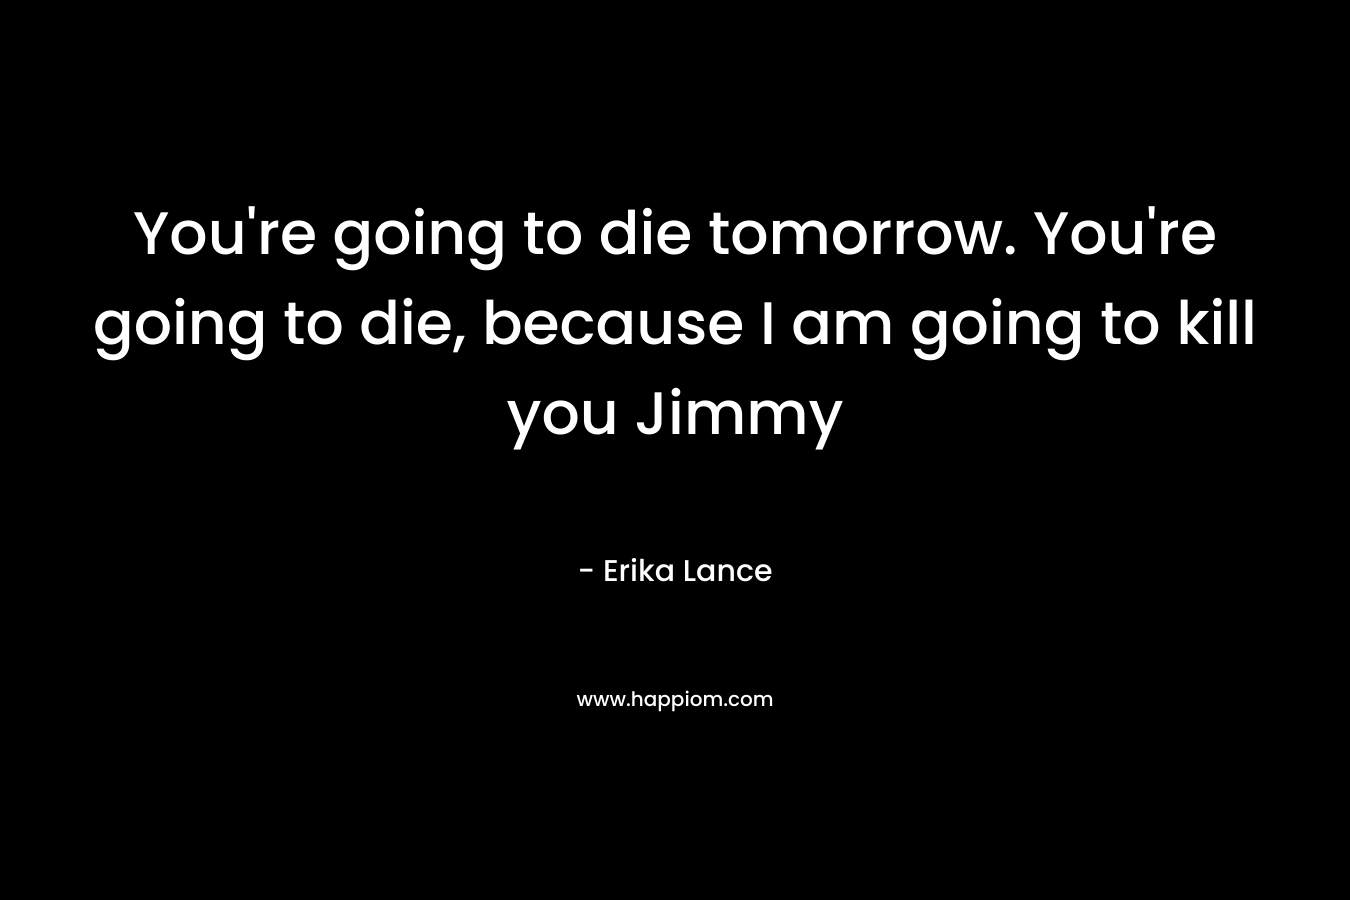 You’re going to die tomorrow. You’re going to die, because I am going to kill you Jimmy – Erika Lance